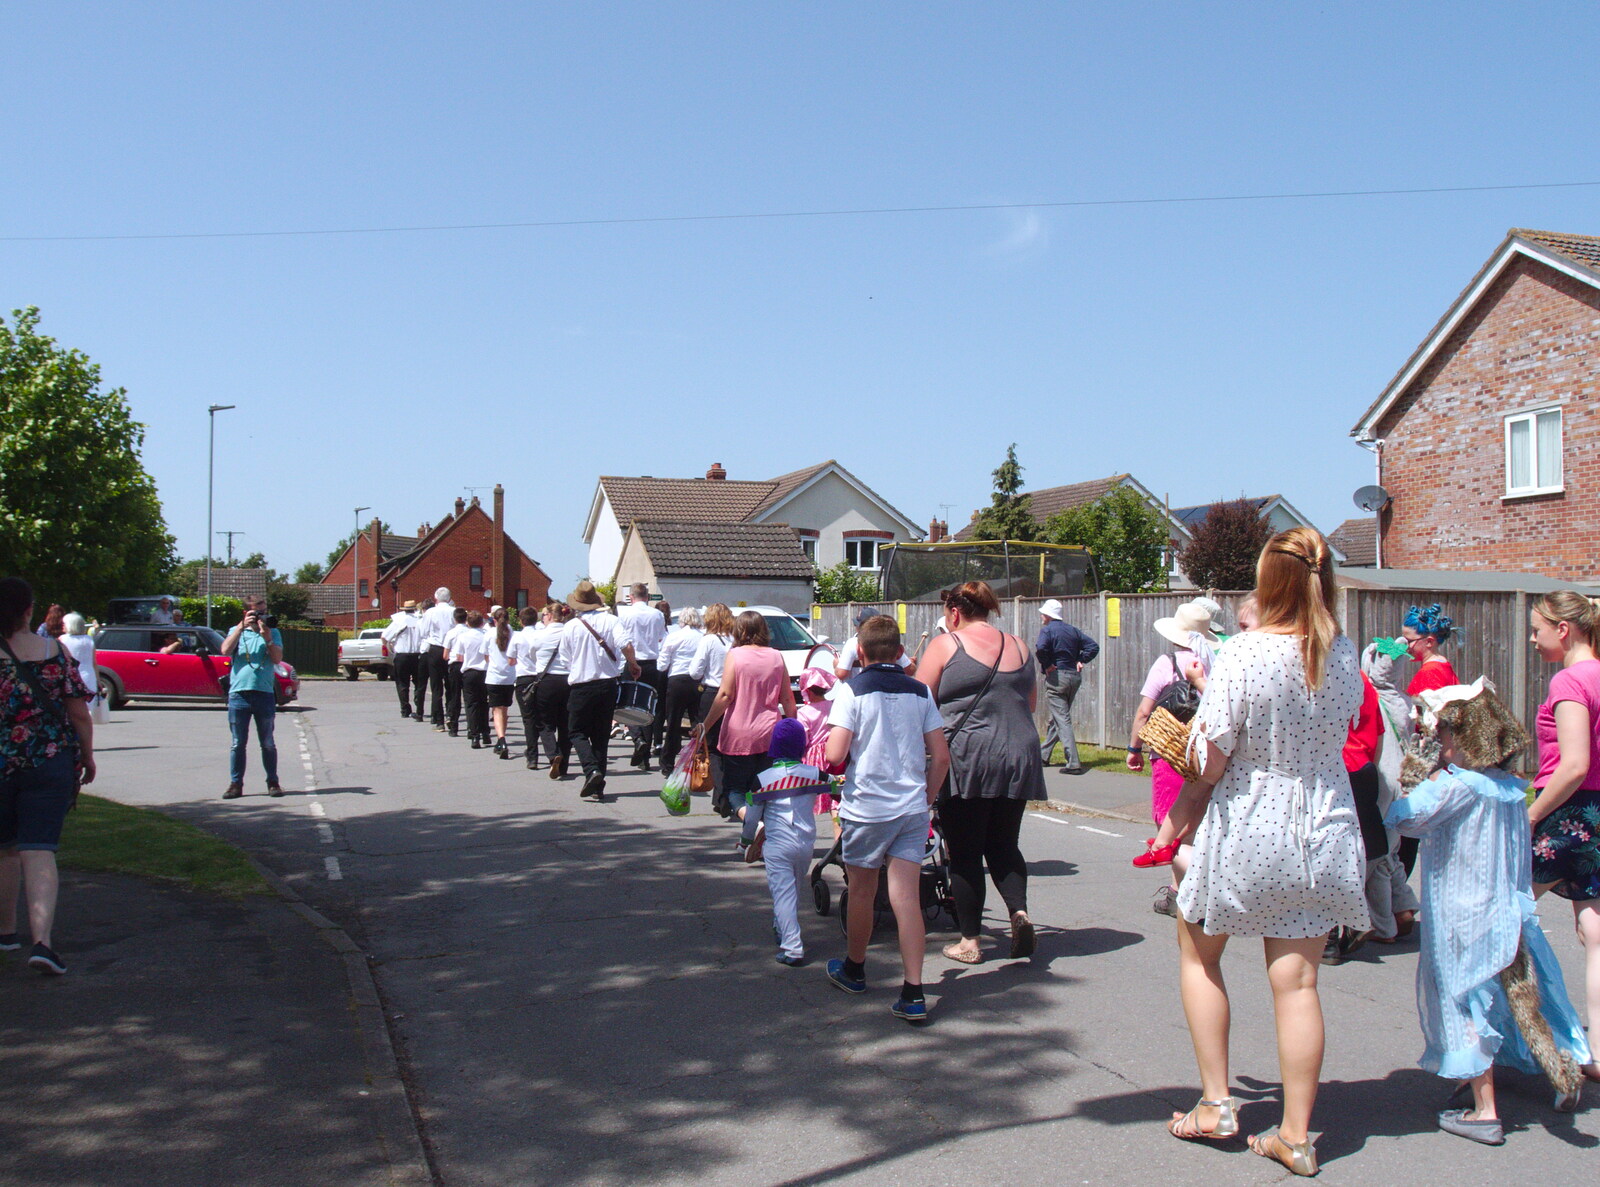 The band marches through the houseing estate from GSB and the Gislingham Fete, Suffolk - 29th June 2019